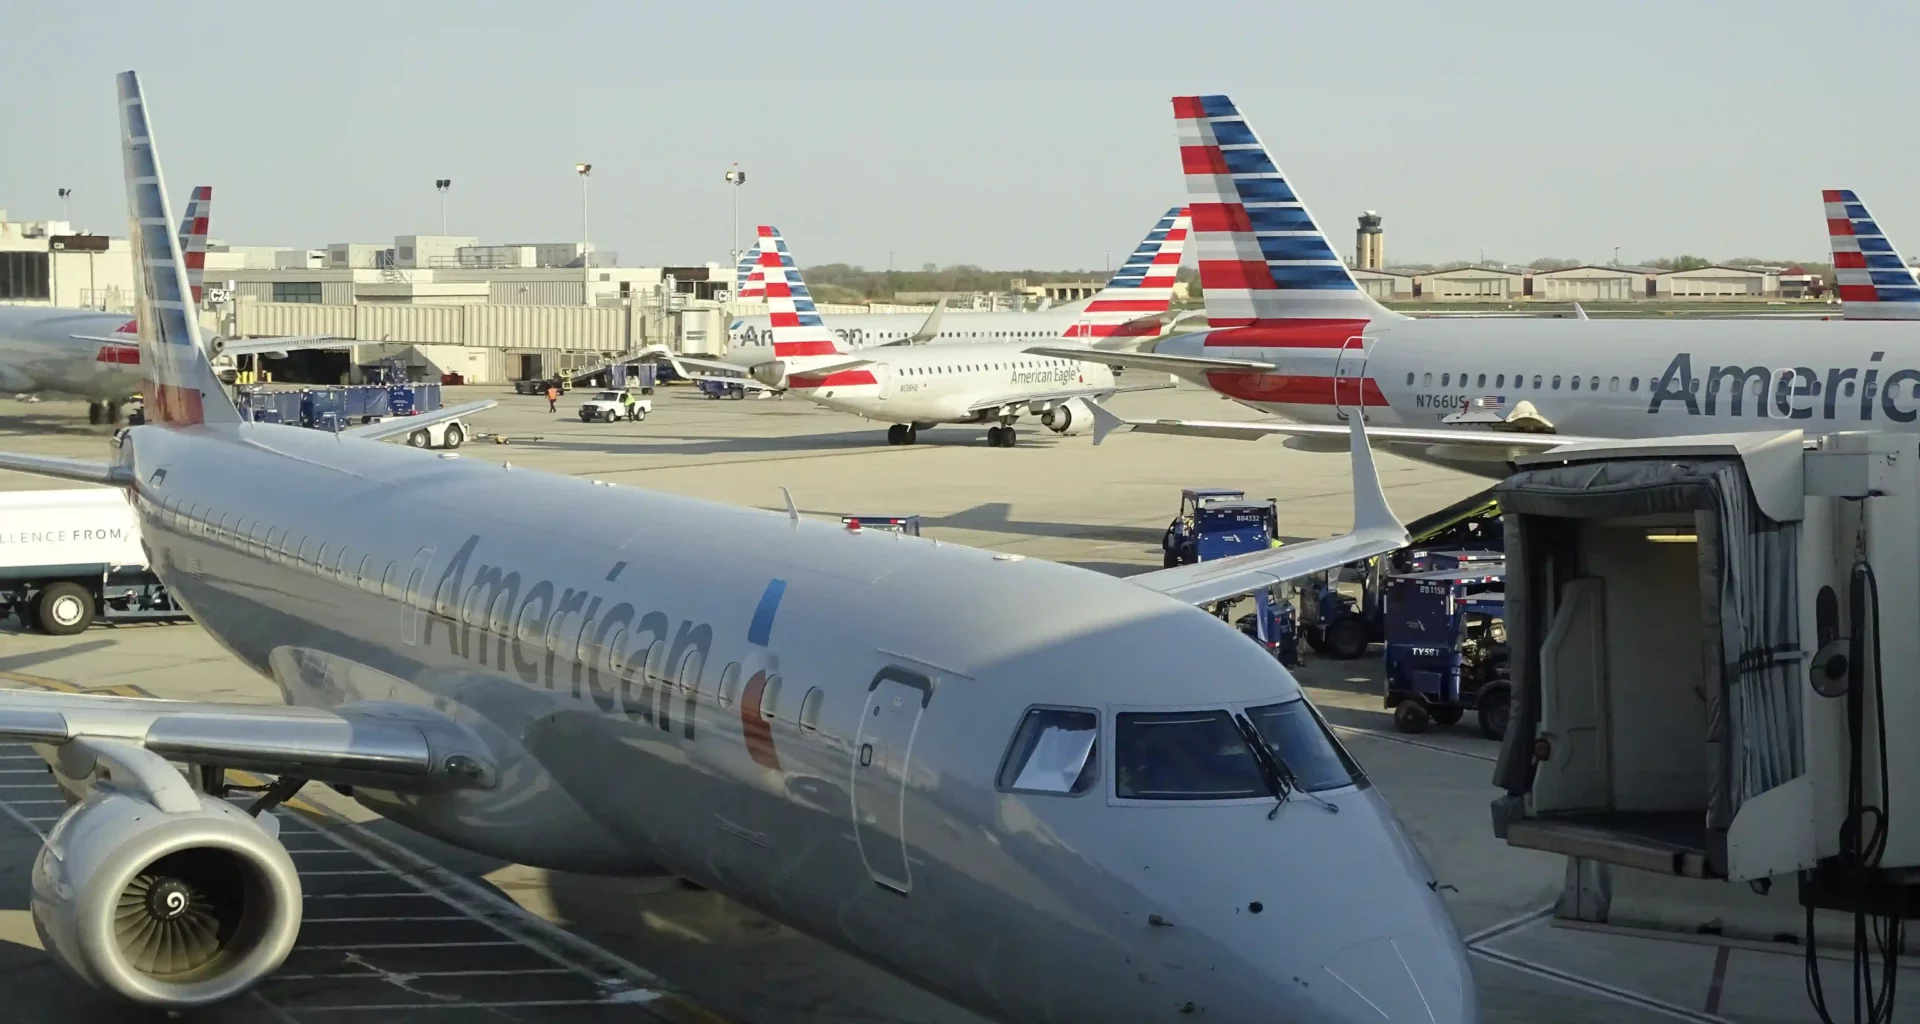 American Airlines Planes on the Apron